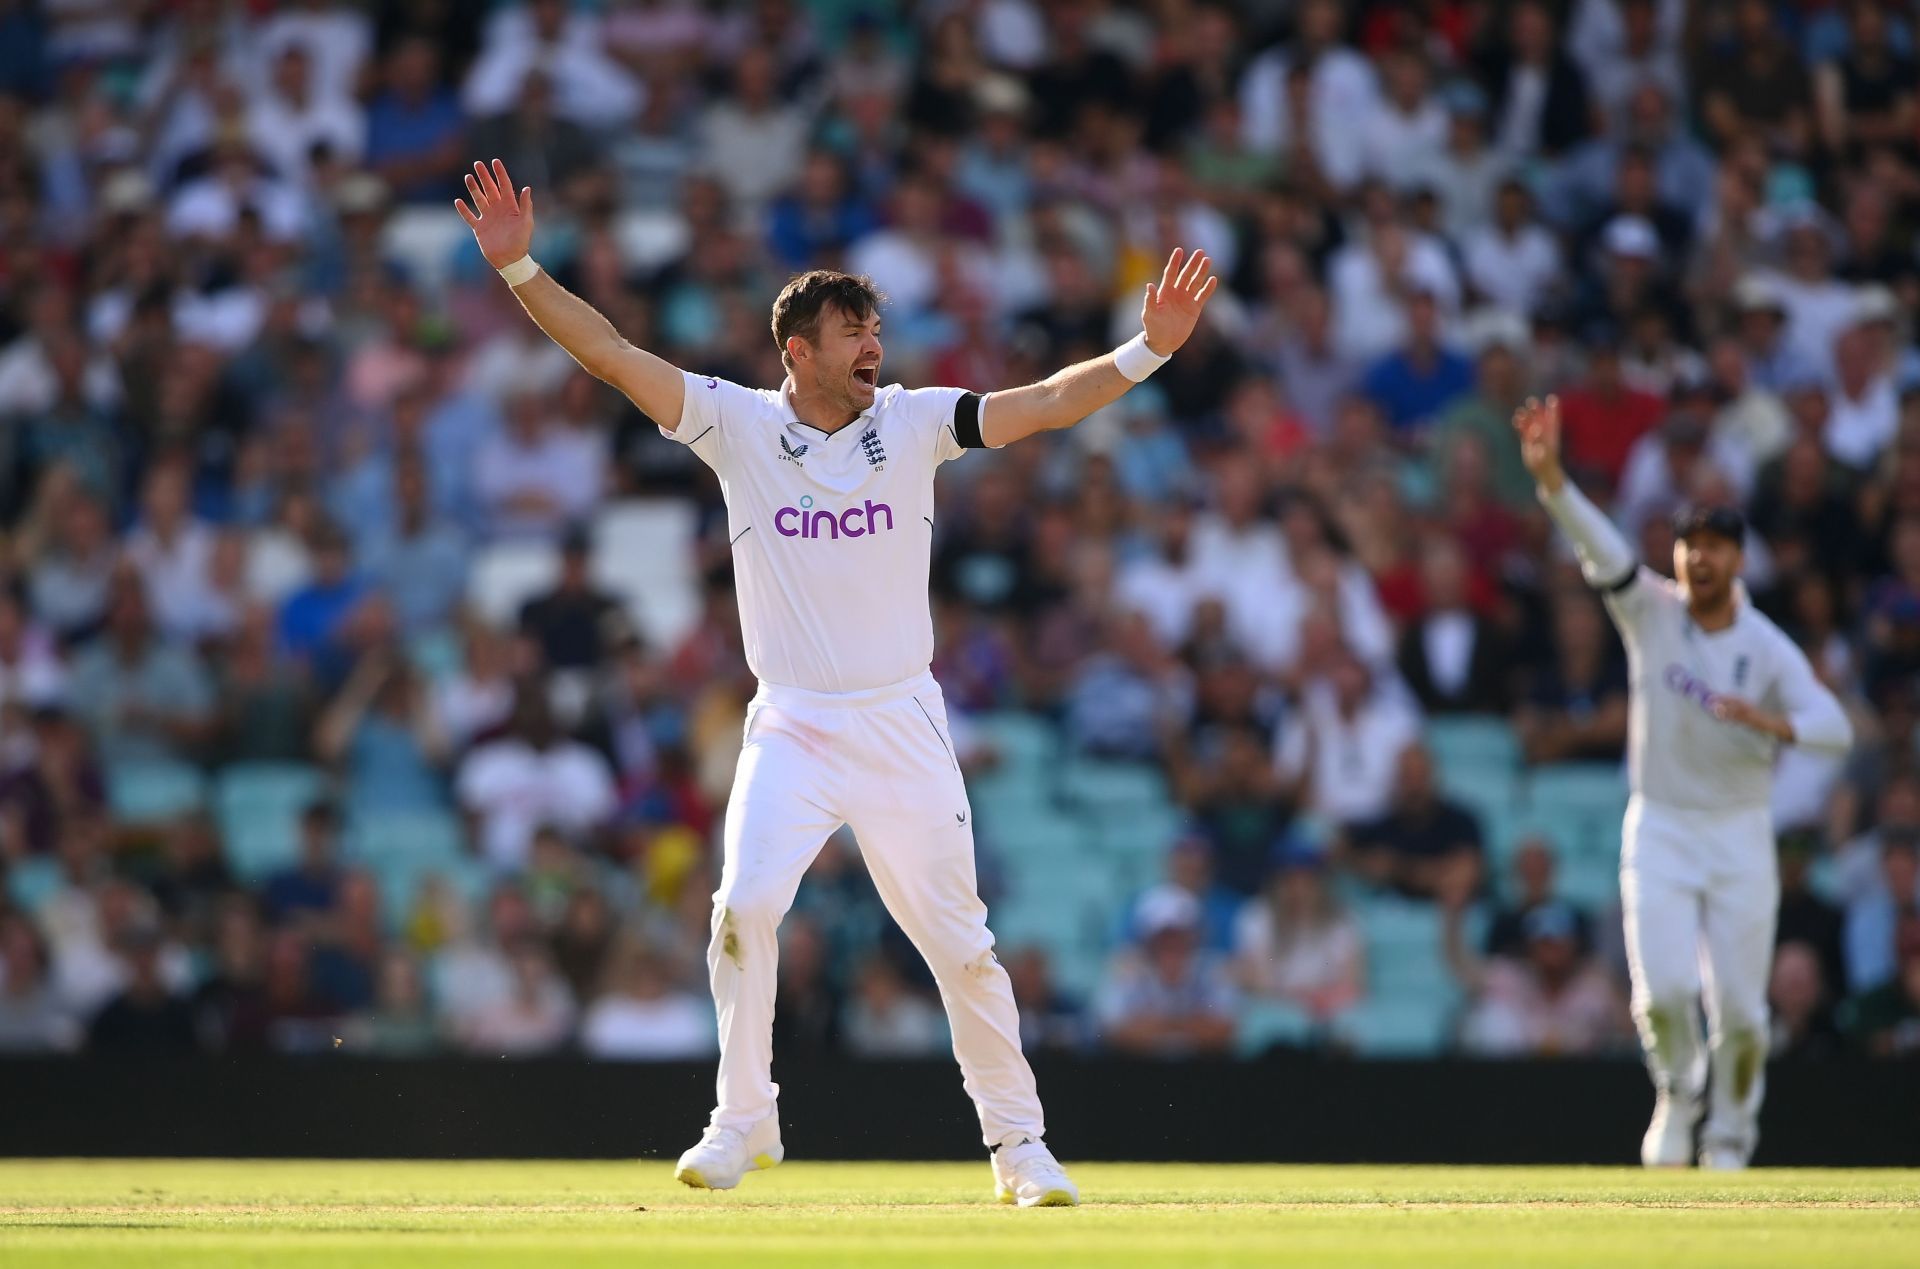 England v South Africa - Third LV= Insurance Test Match: Day Four (Image Courtesy: Getty Images)